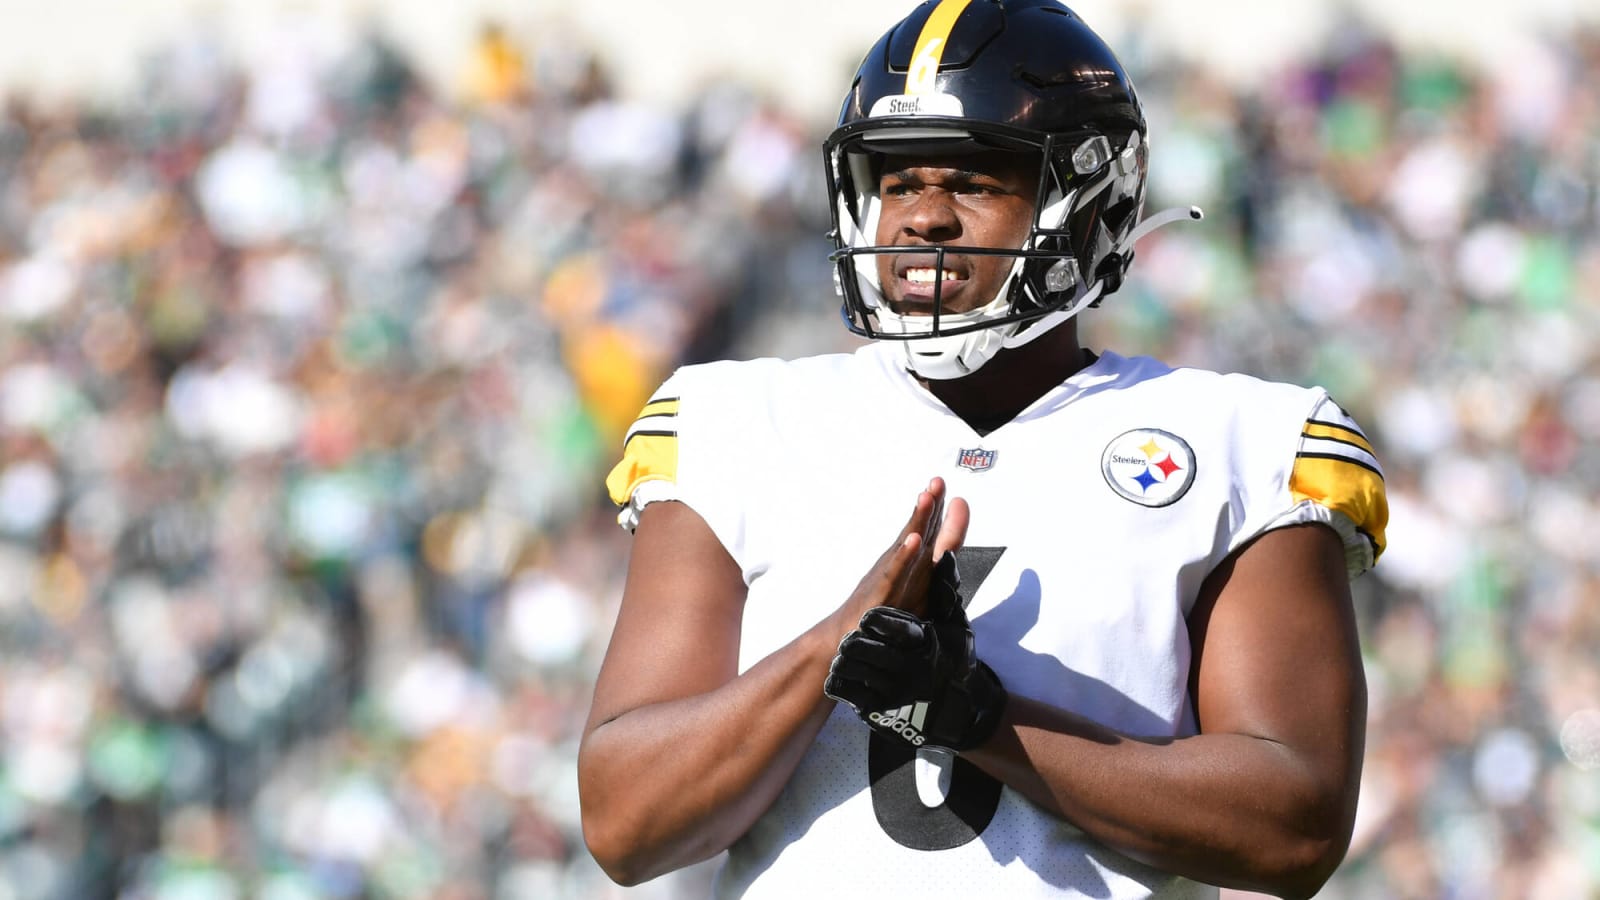 A Clear Favorite To Win The Steelers Punting Battle Has Finally Emerged Per 1 Insider